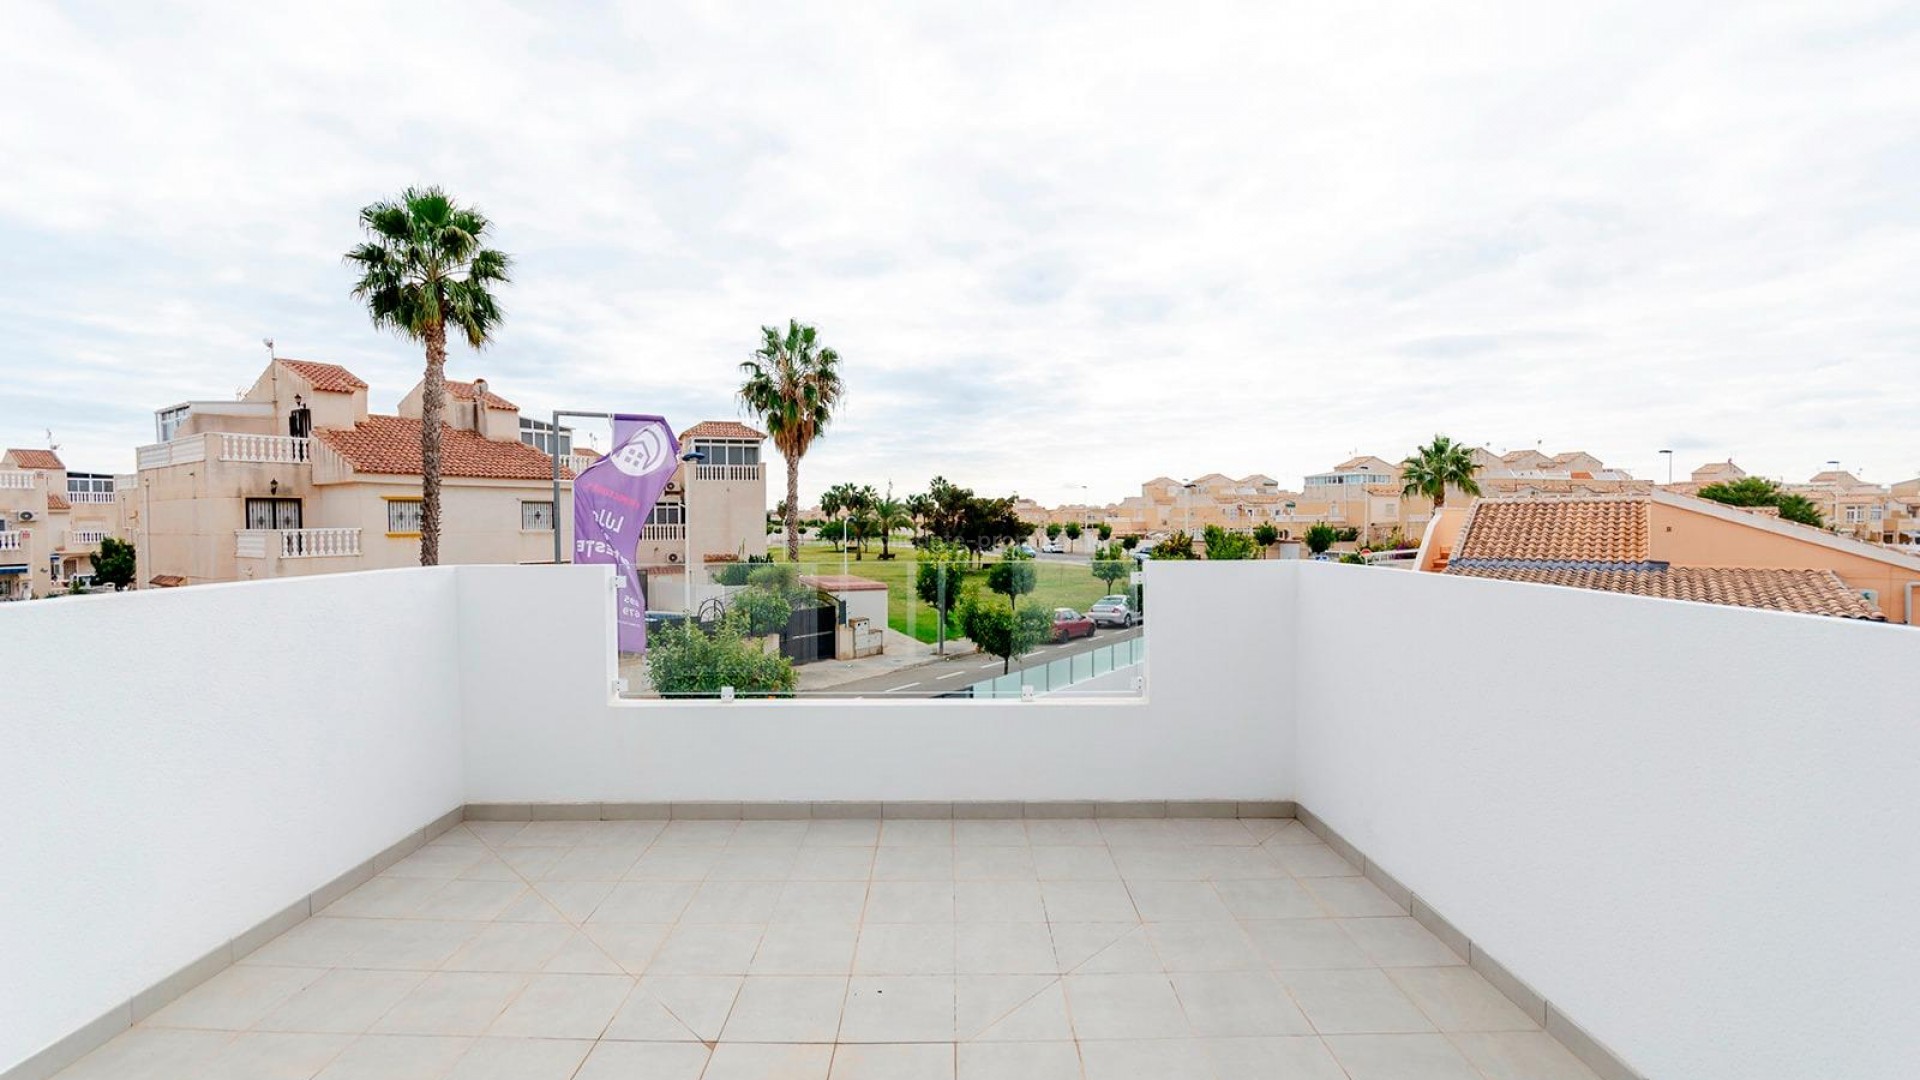 Newly built villas in Torreta, Torrevieja, 3 bedrooms, 2 bathrooms, open kitchen, garden with private pool, possibility of solarium, parking on the plot